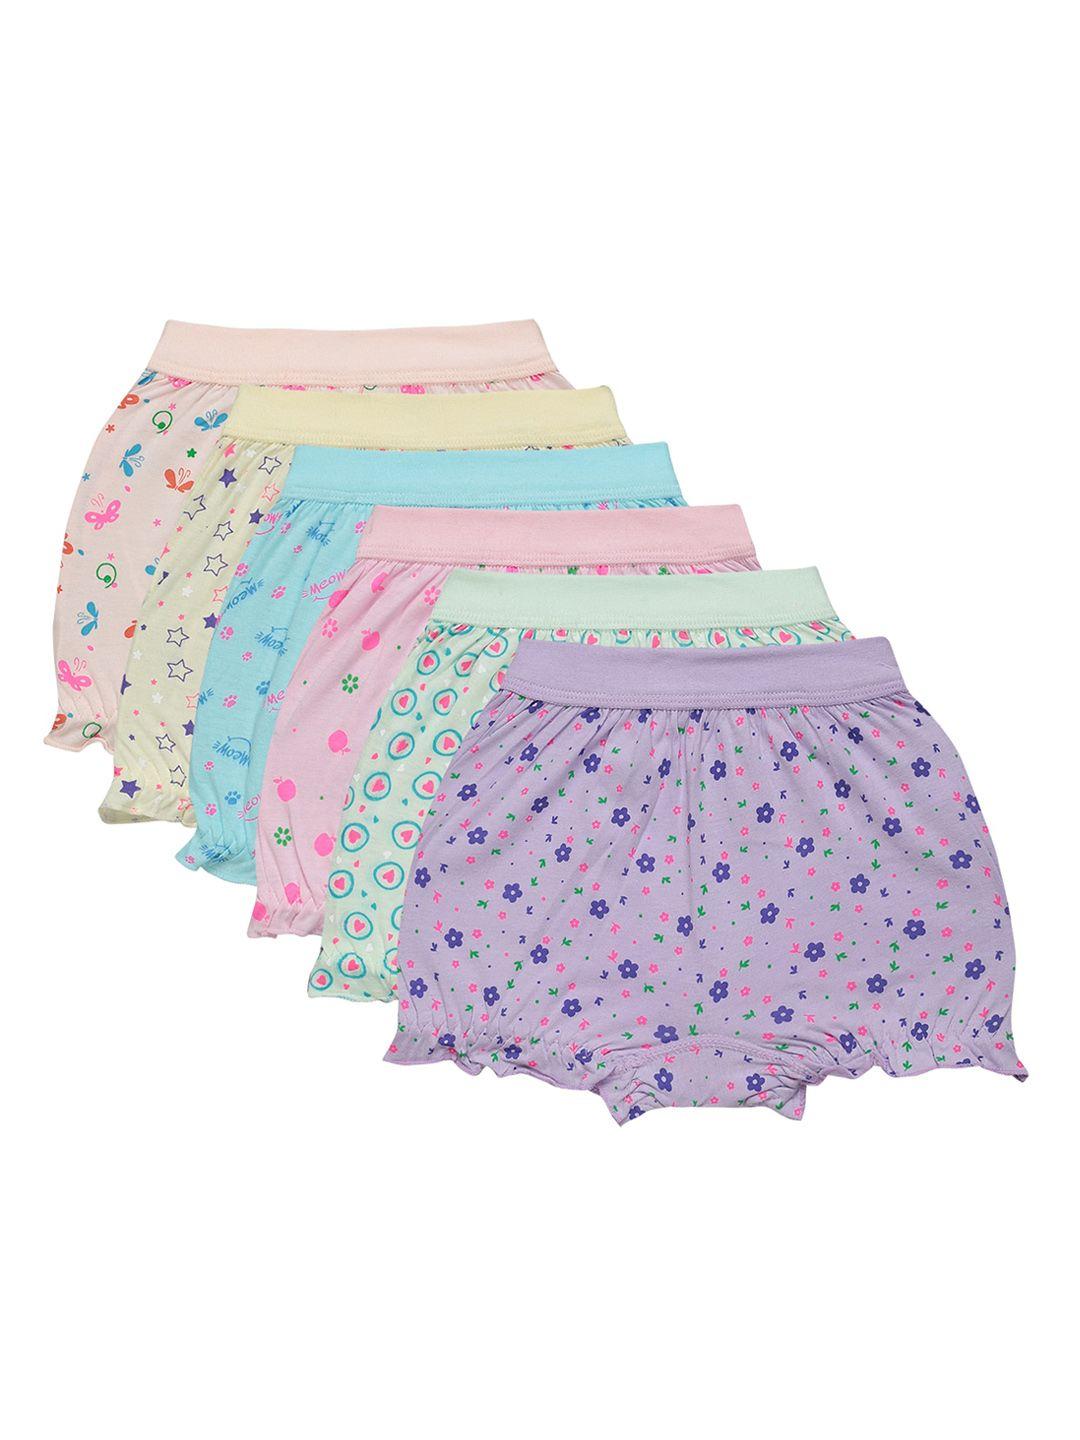 bodycare kids kids pack of 6 assorted no harm dyes cotton bloomer briefs